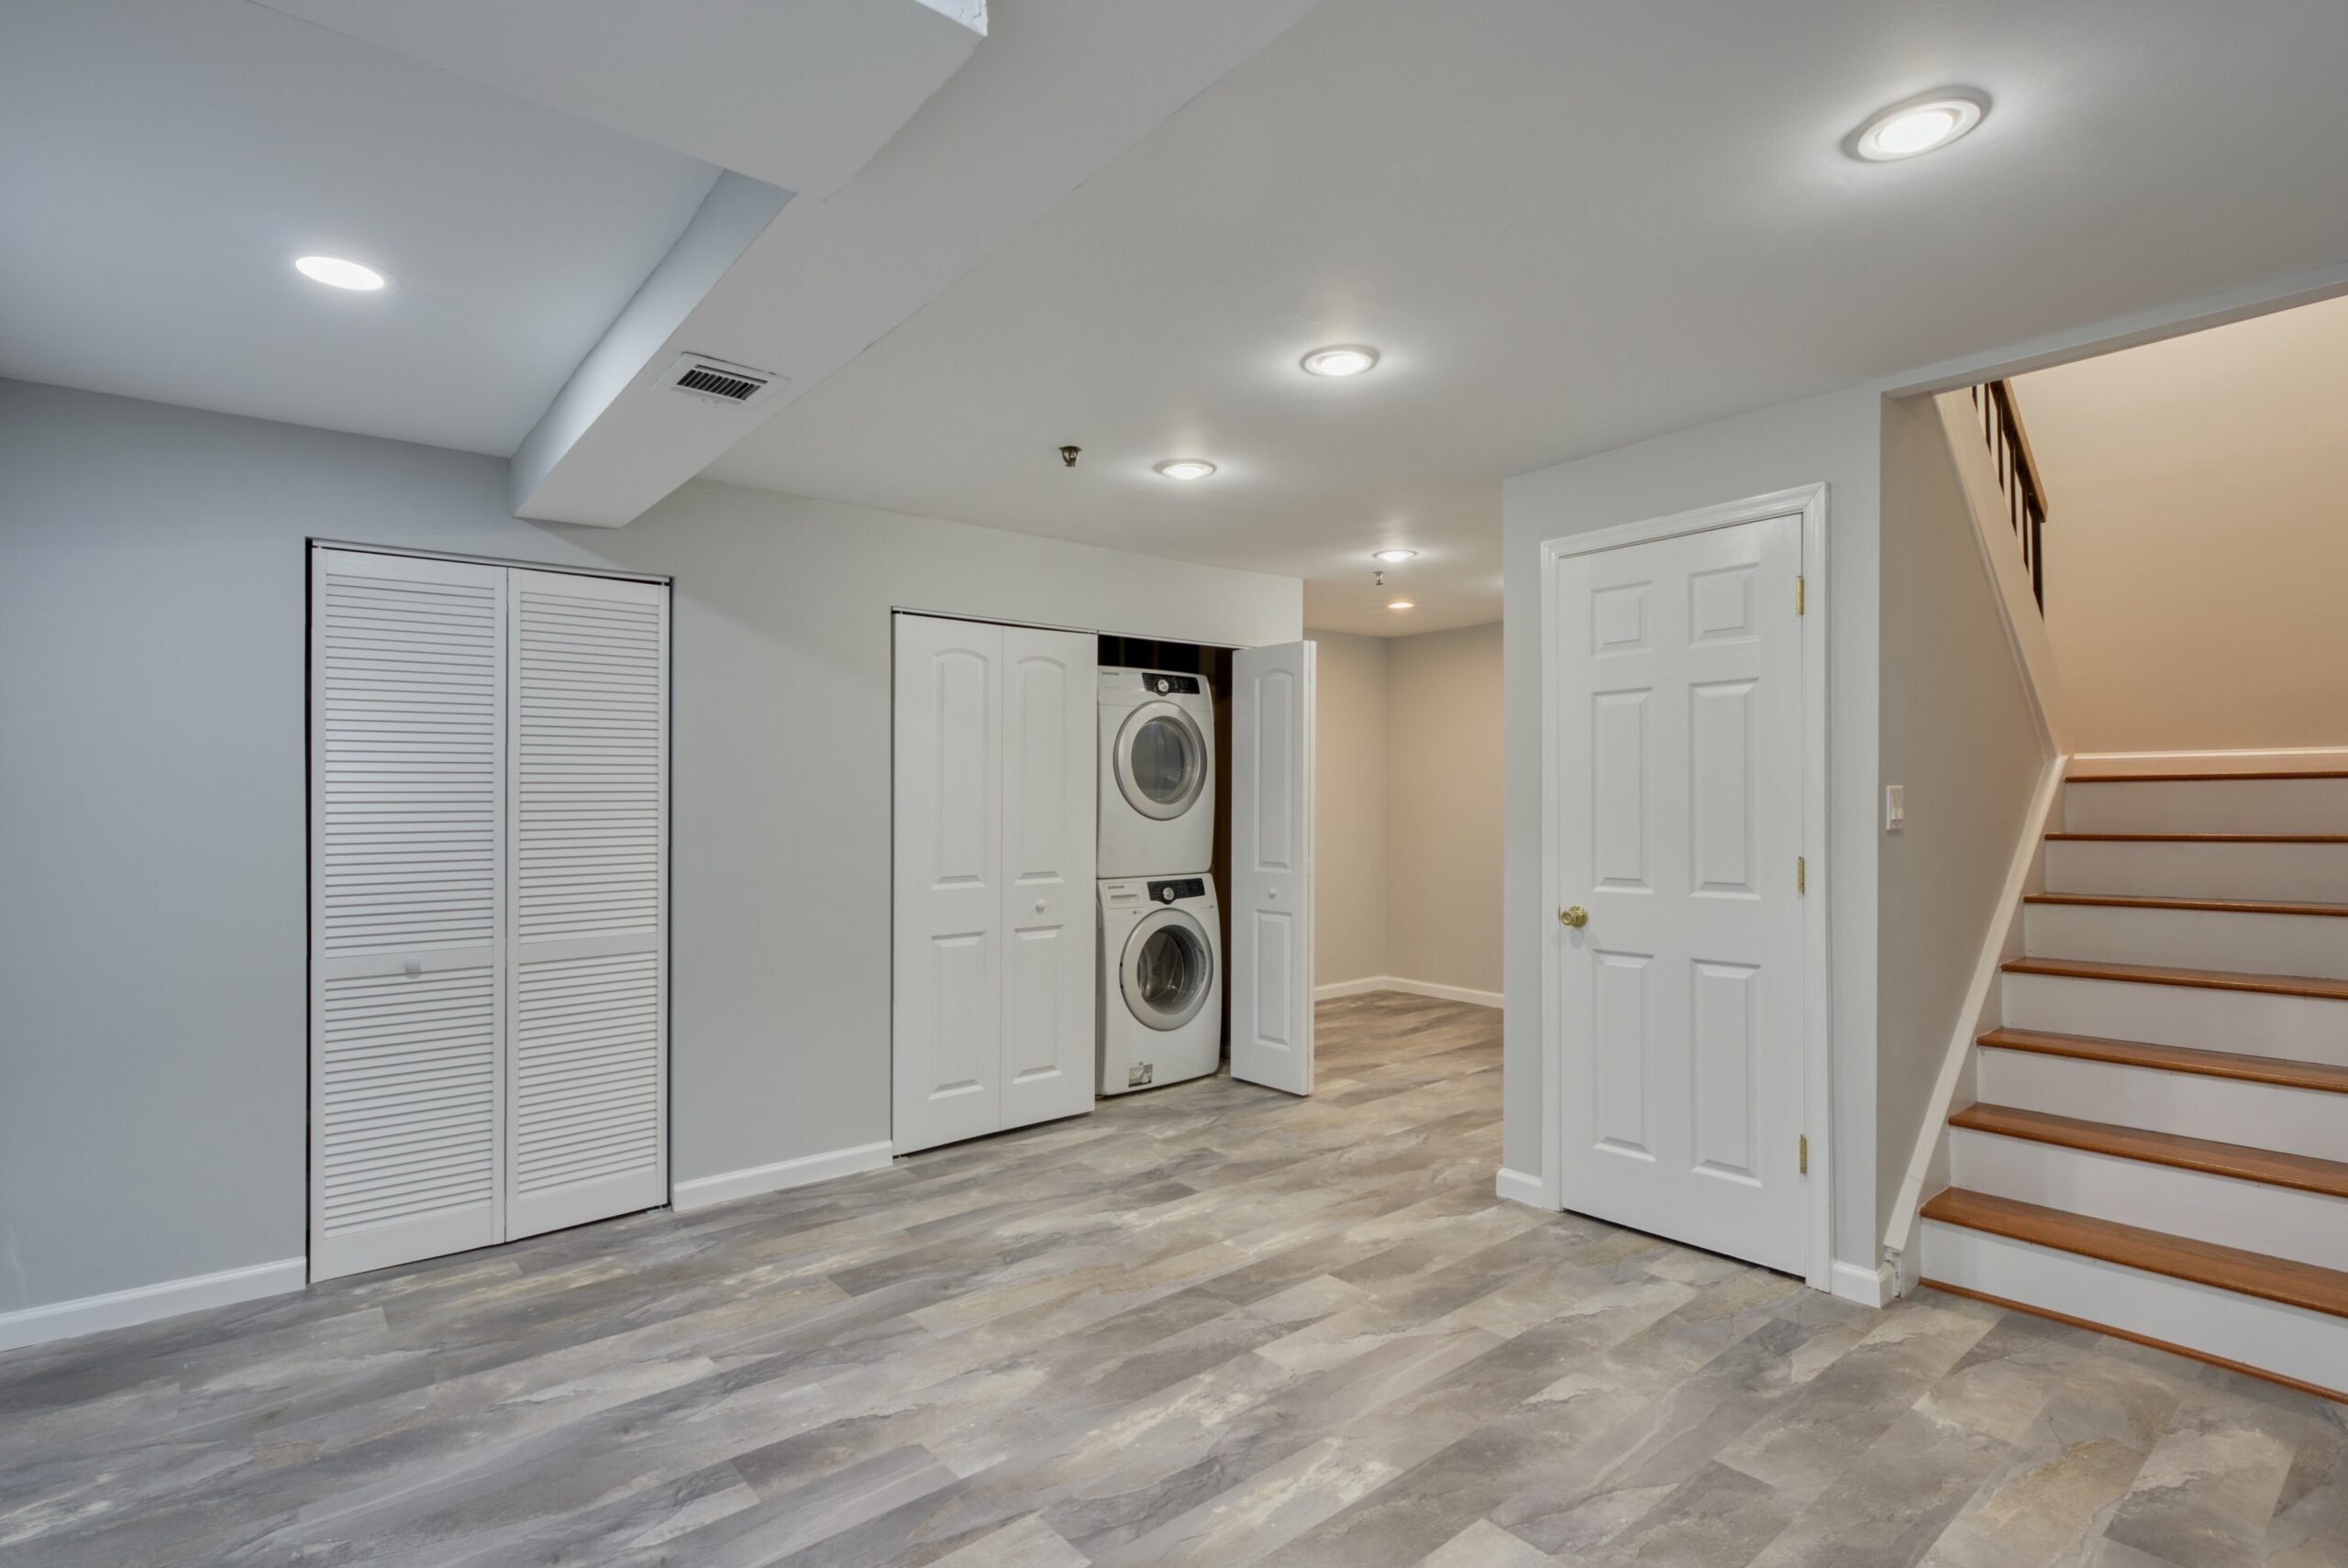 Professional interior photo of 6302 Arwen Court, Fort Washington, MD - showing the basement with new grey LVP flooring, storage closets and laundry closet and stairs leading to the main level